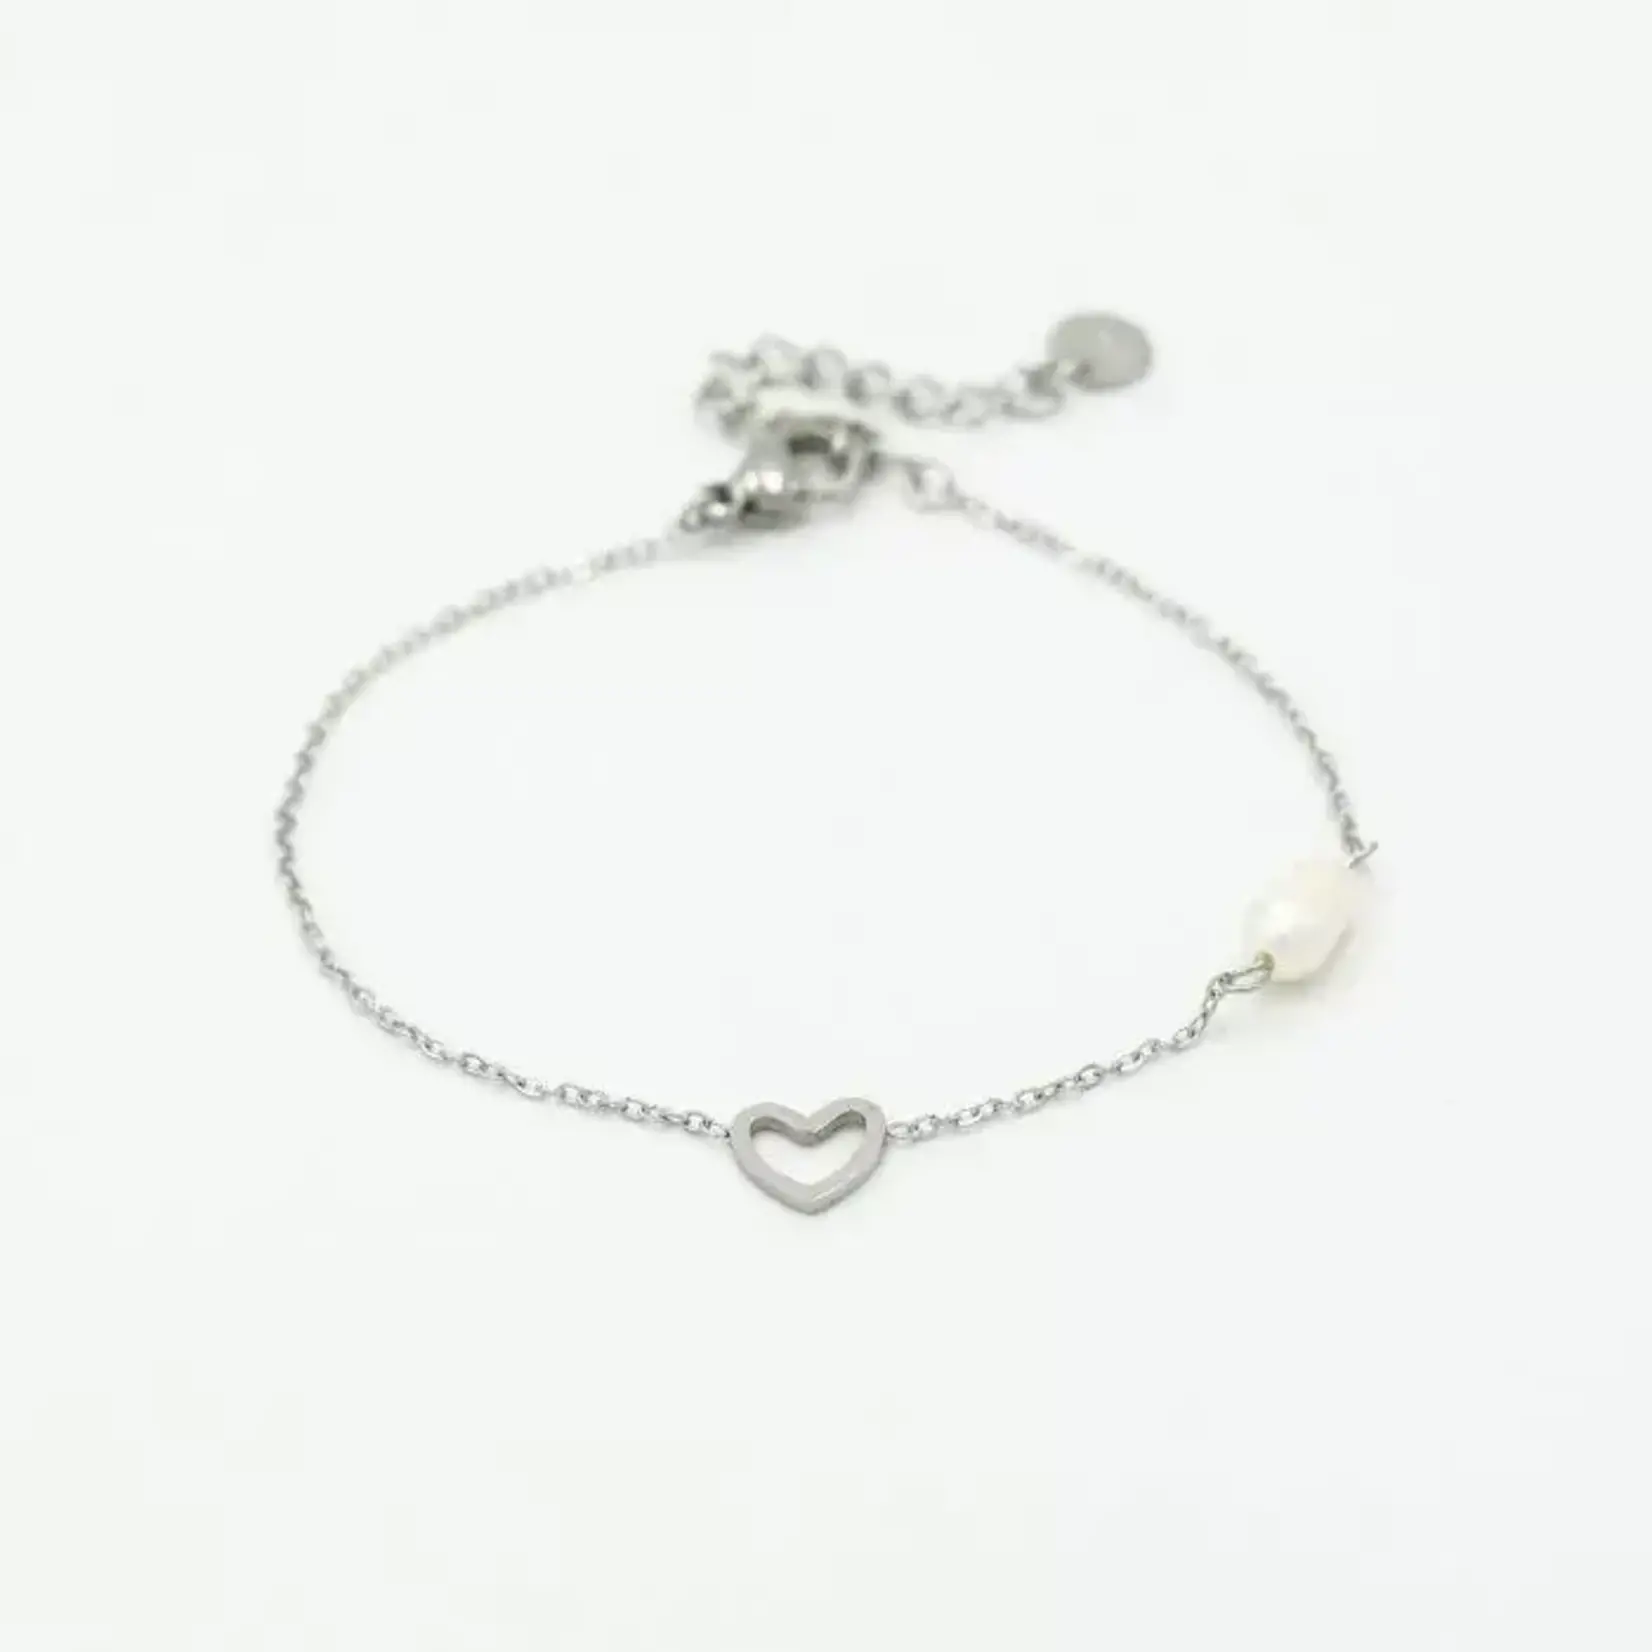 More the Firm Armband heart and pearl